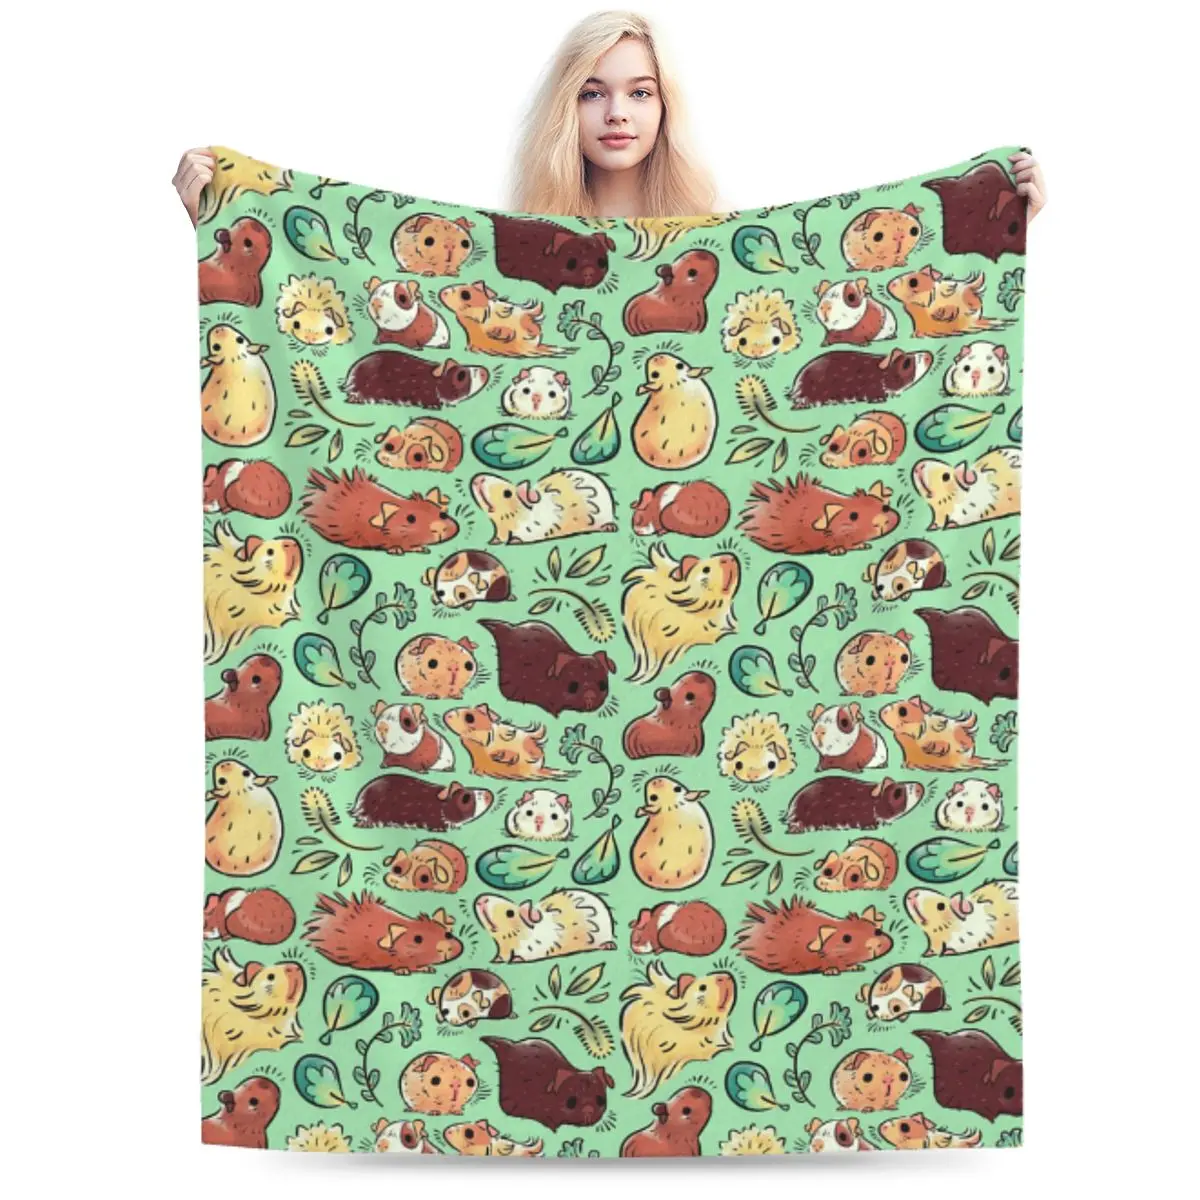 

Guinea Pig Huddle Soft Flannel Throw Blanket for Couch Bed Sofa Cover Blanket Warm Blankets Travel Blanket